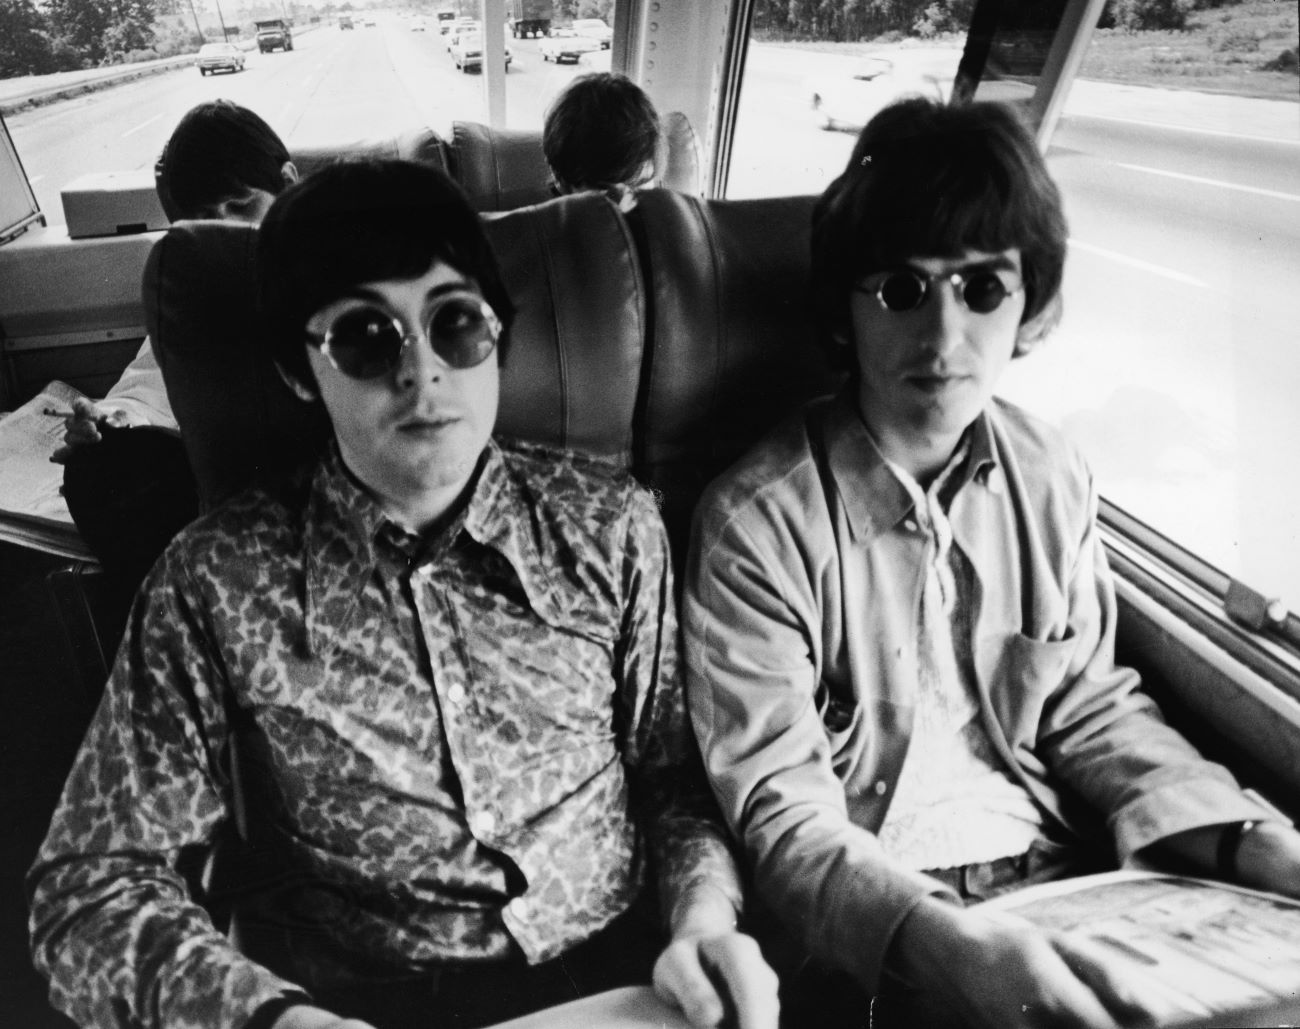 A black and white picture of Paul McCartney and George Harrison sitting next to each other on a bus.